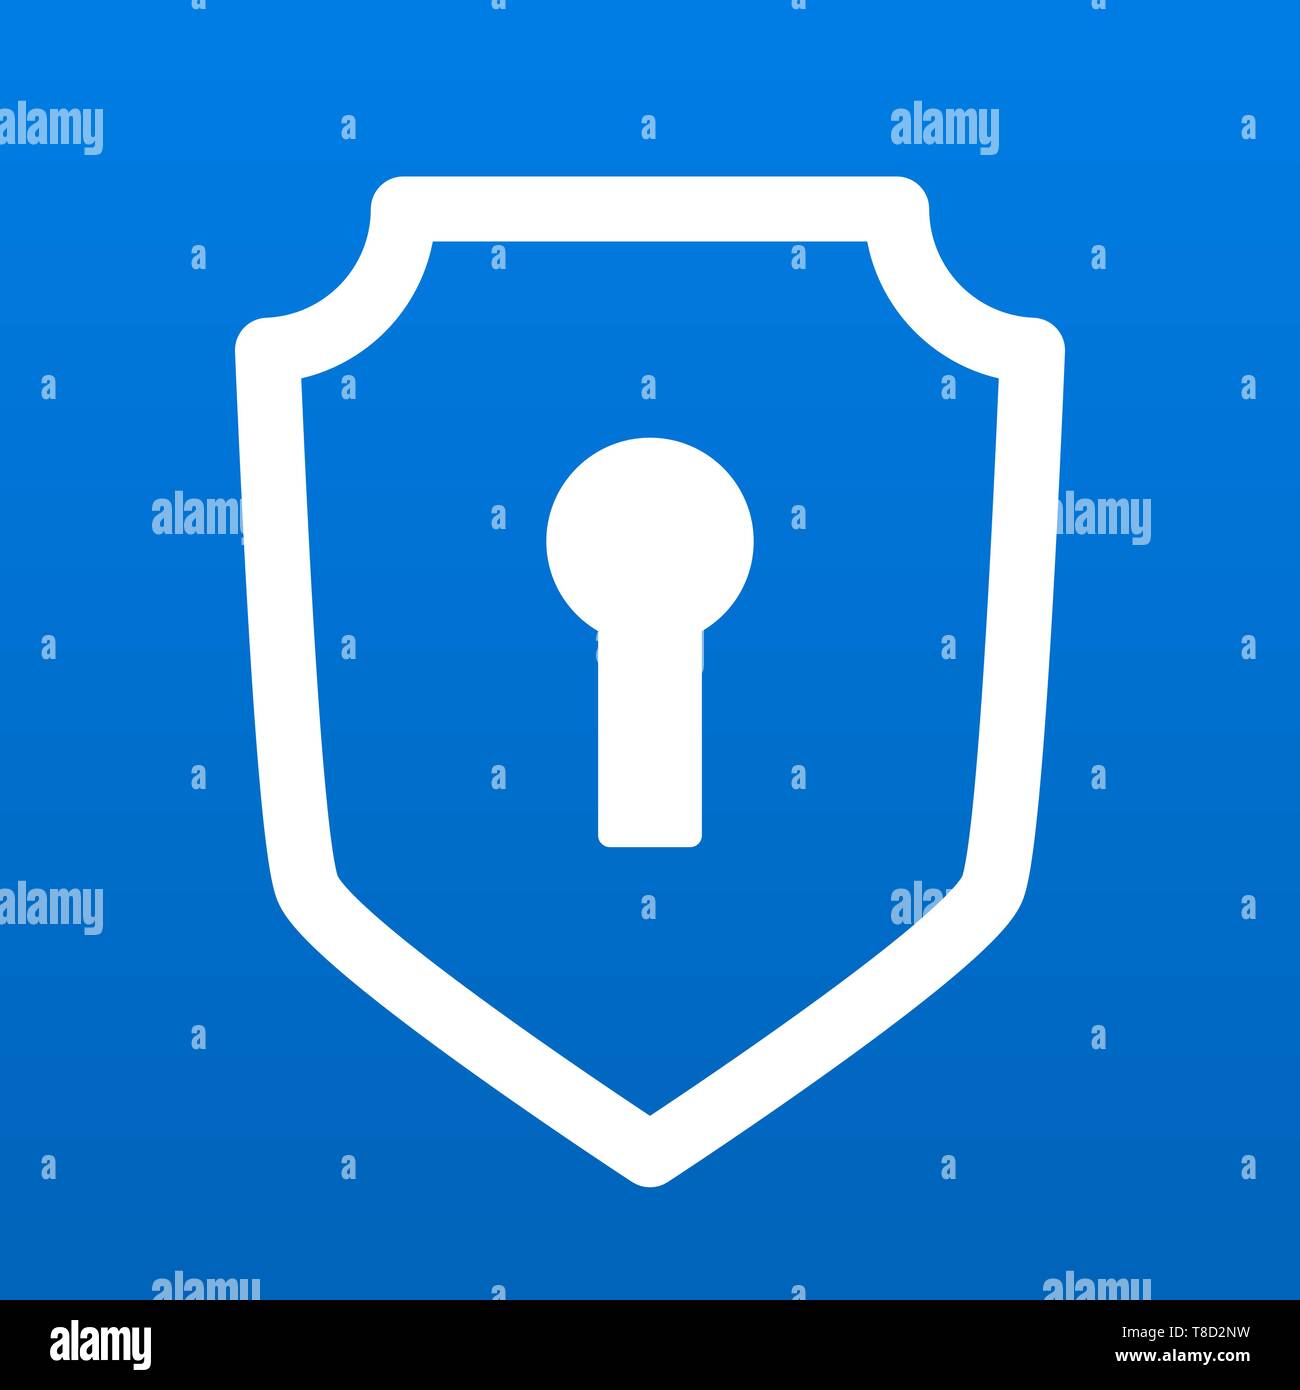 Shield security lock icon symbol for safety and protection vector illustration Stock Vector